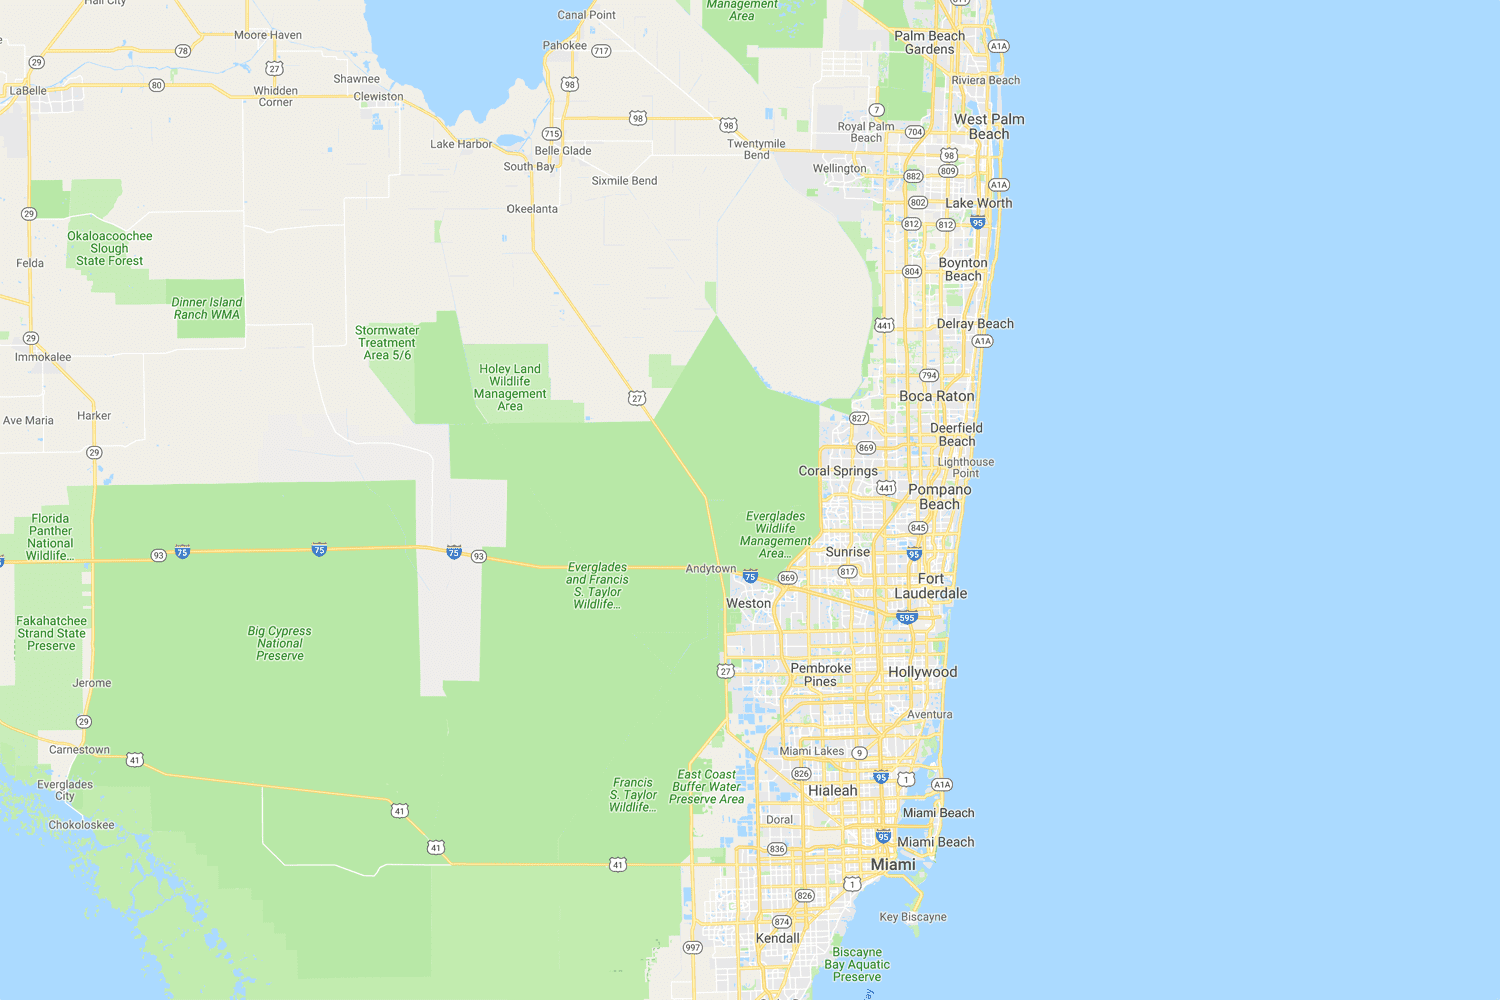 Southeast Florida area TPW locations